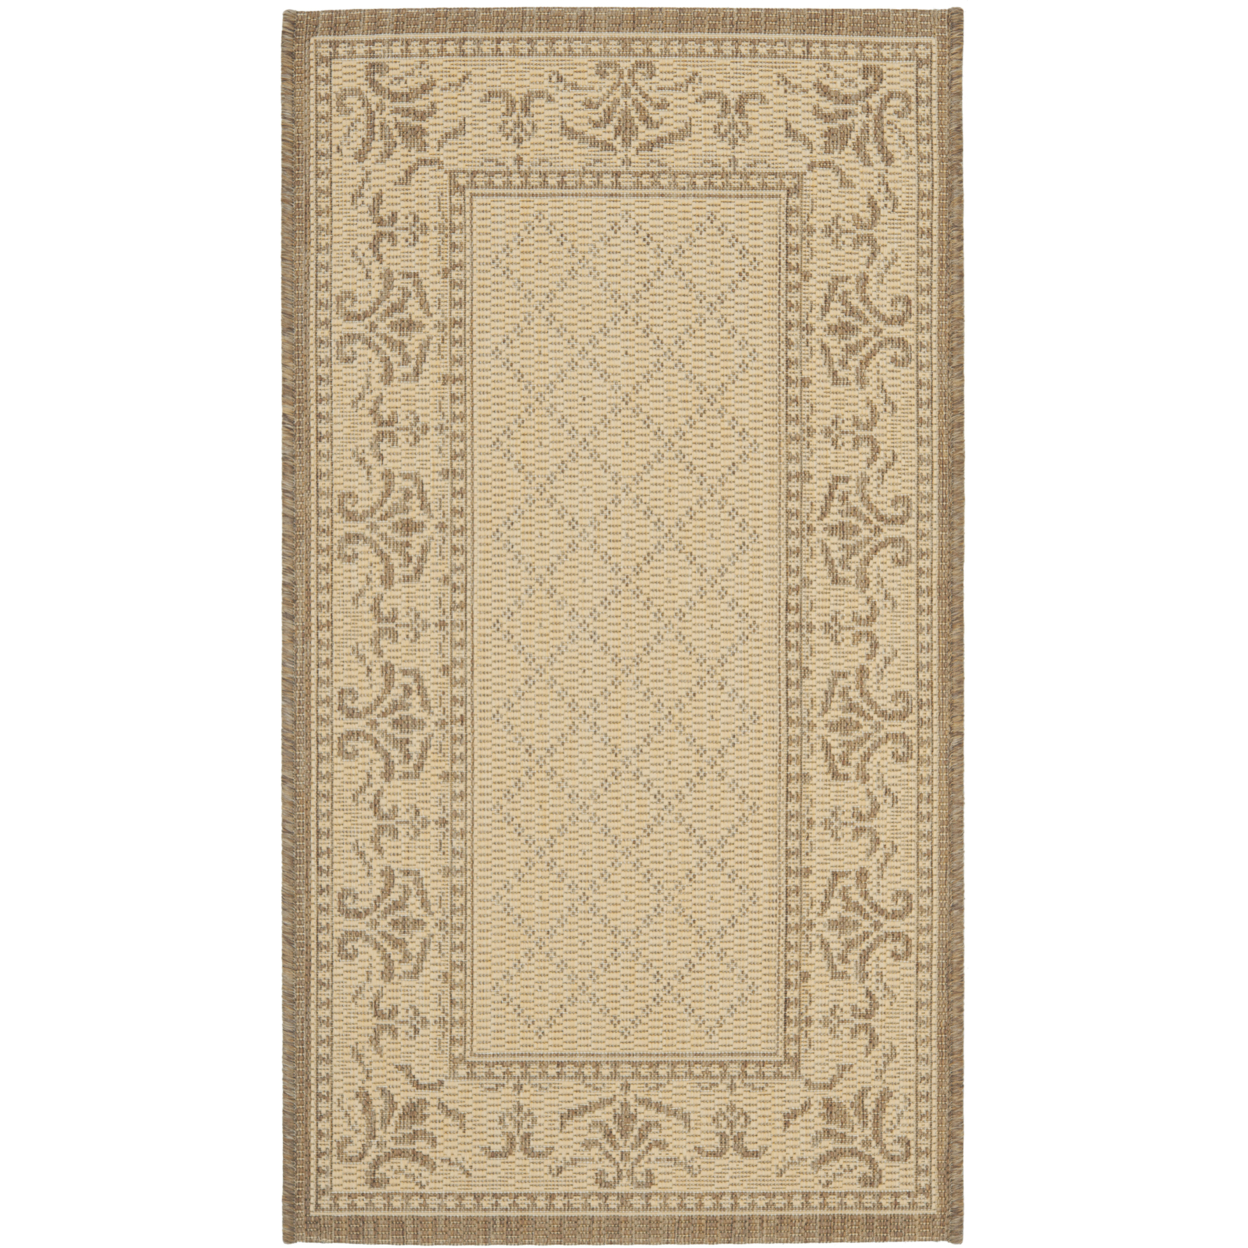 SAFAVIEH Outdoor CY0901-3001 Courtyard Natural / Brown Rug - 4' X 5' 7